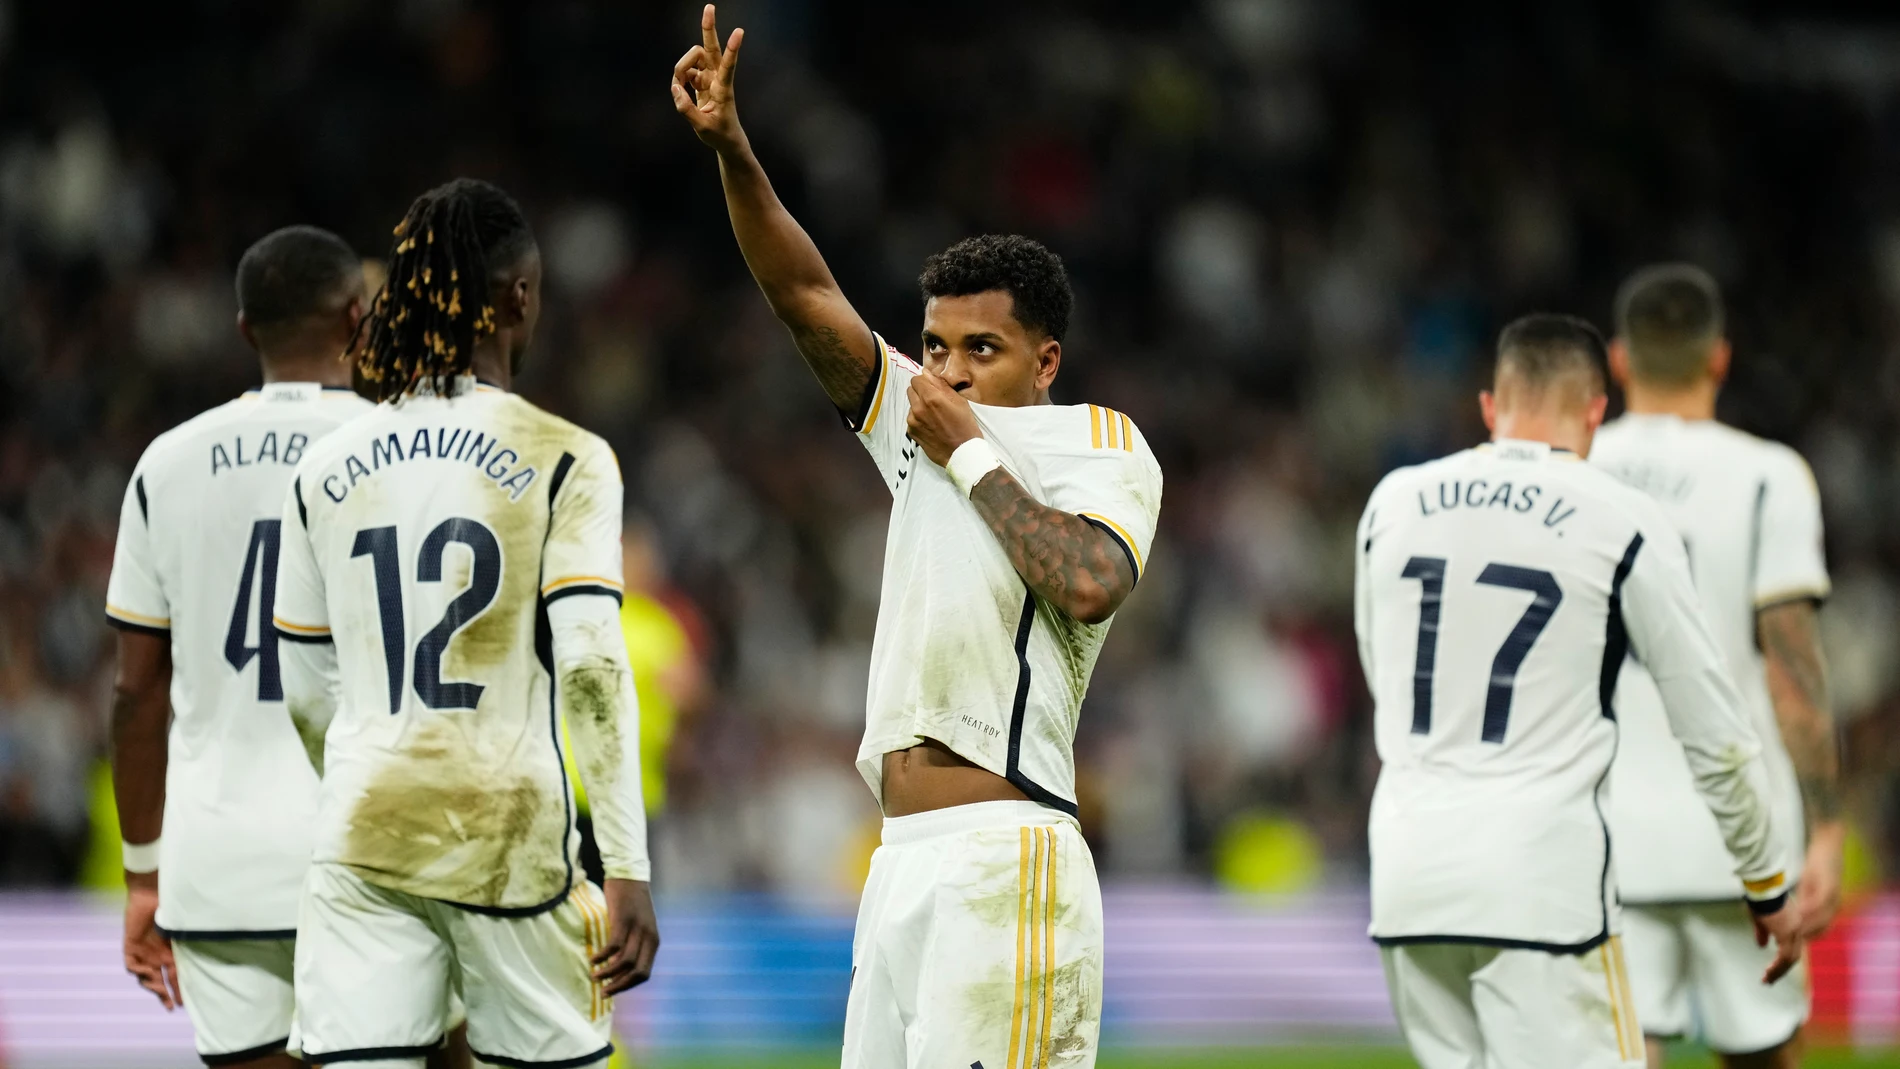 Real Madrid's Rodrygo, centre, celebrates after scoring his side's fifth goal during the Spanish La Liga soccer match between Real Madrid and Valencia at the Santiago Bernabeu stadium in Madrid, Spain, Saturday, Nov. 11, 2023. (AP Photo/Jose Breton)